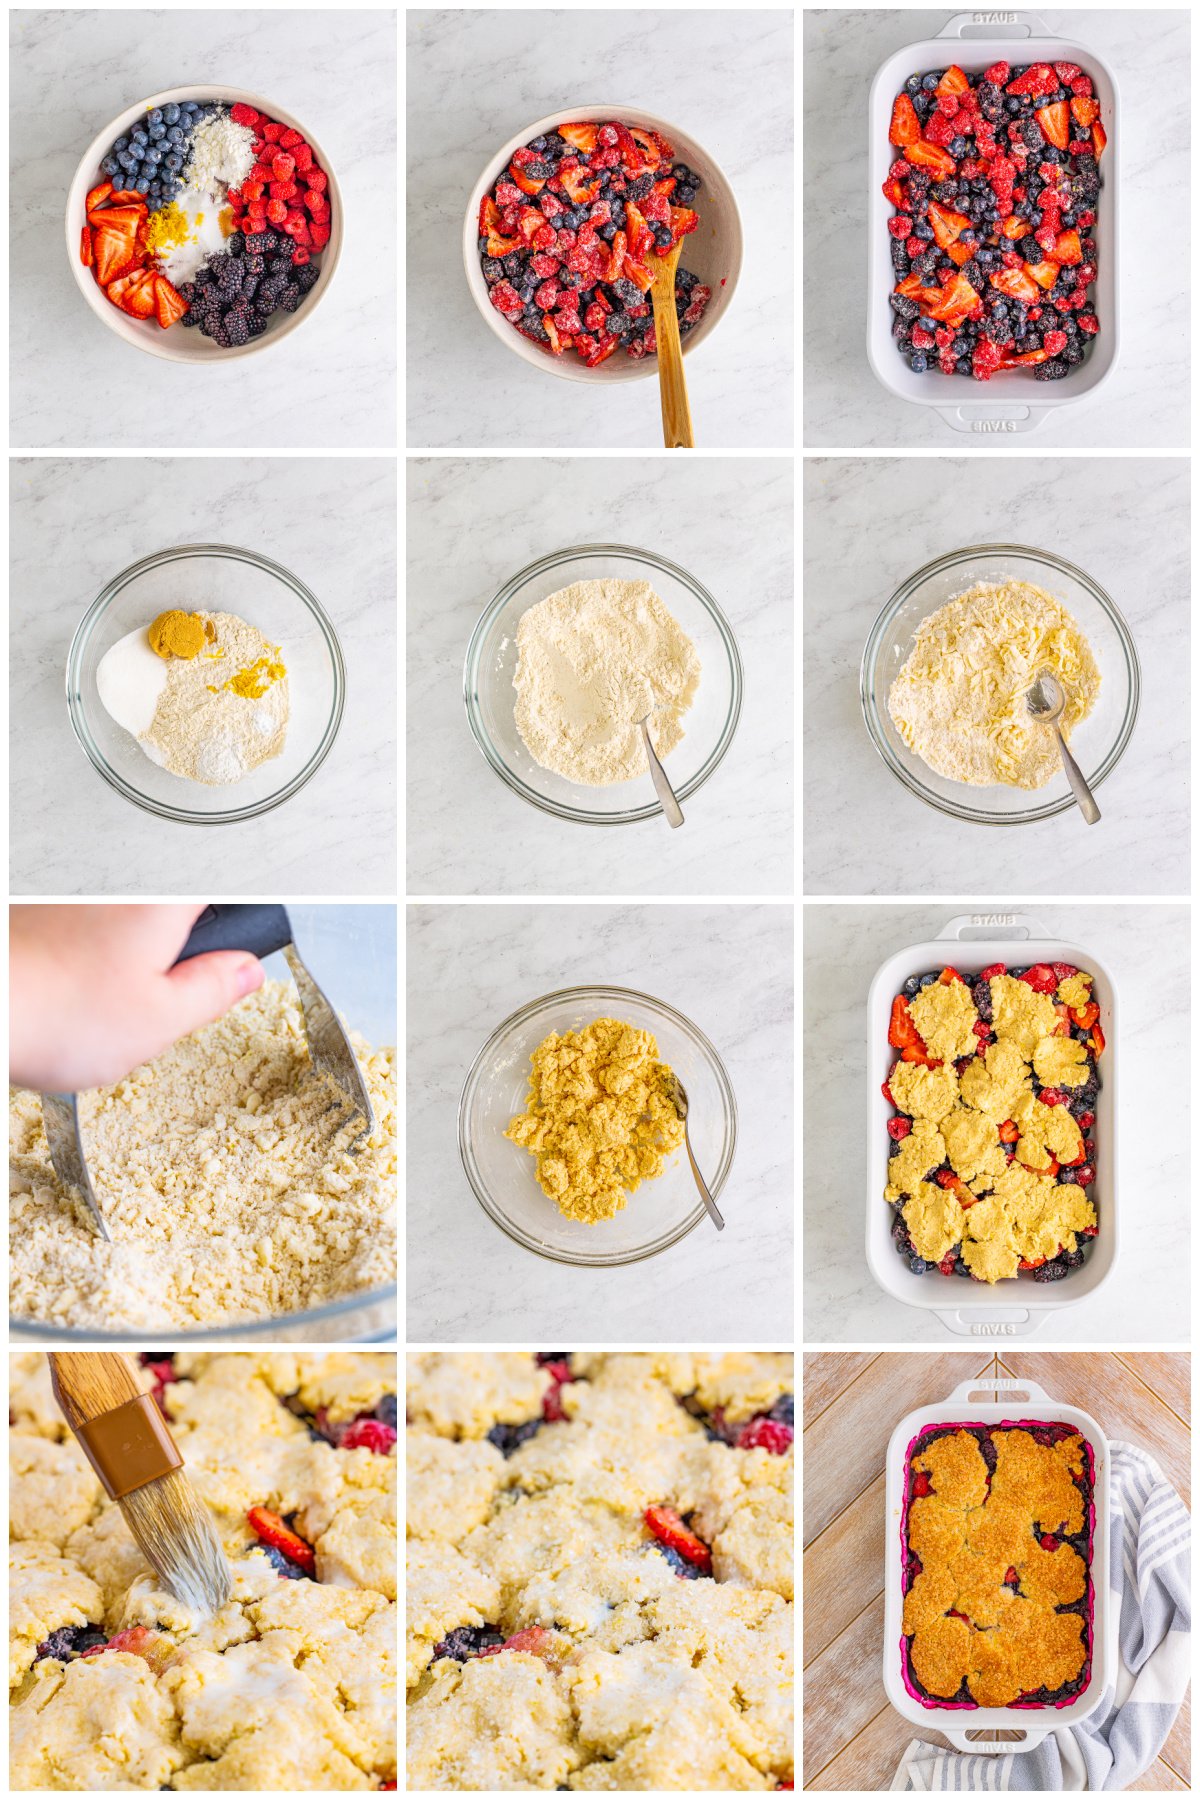 Step by step photos on how to make Berry Cobbler.